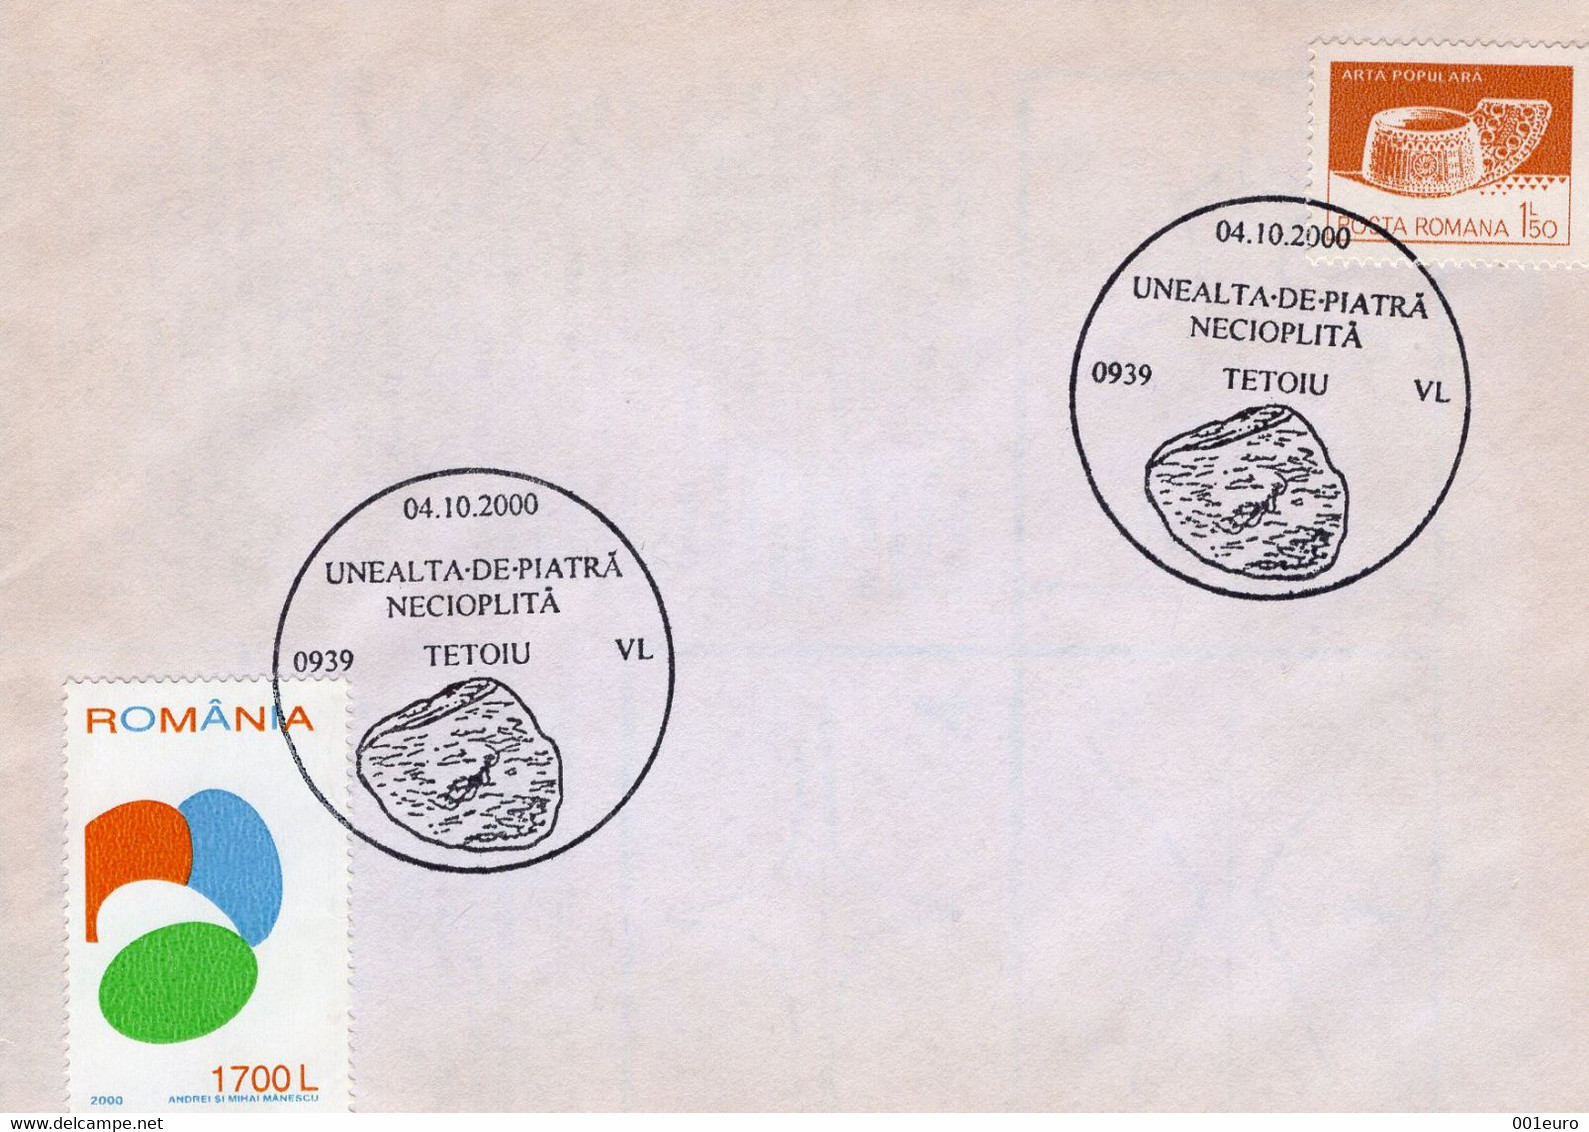 ROMANIA 2000: STONE AGE TOOL Illustrated Postmark - Registered Shipping! - Marcofilie